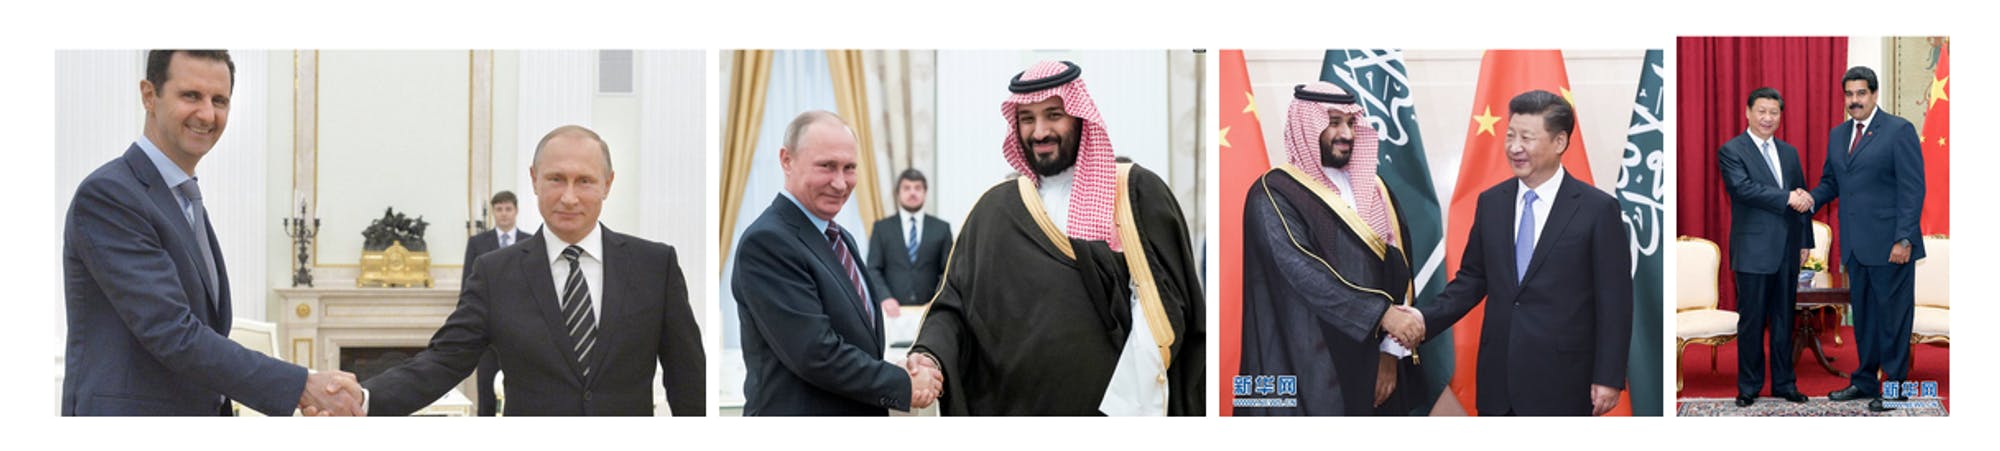 Multiple photos showing dictators shaking hands.